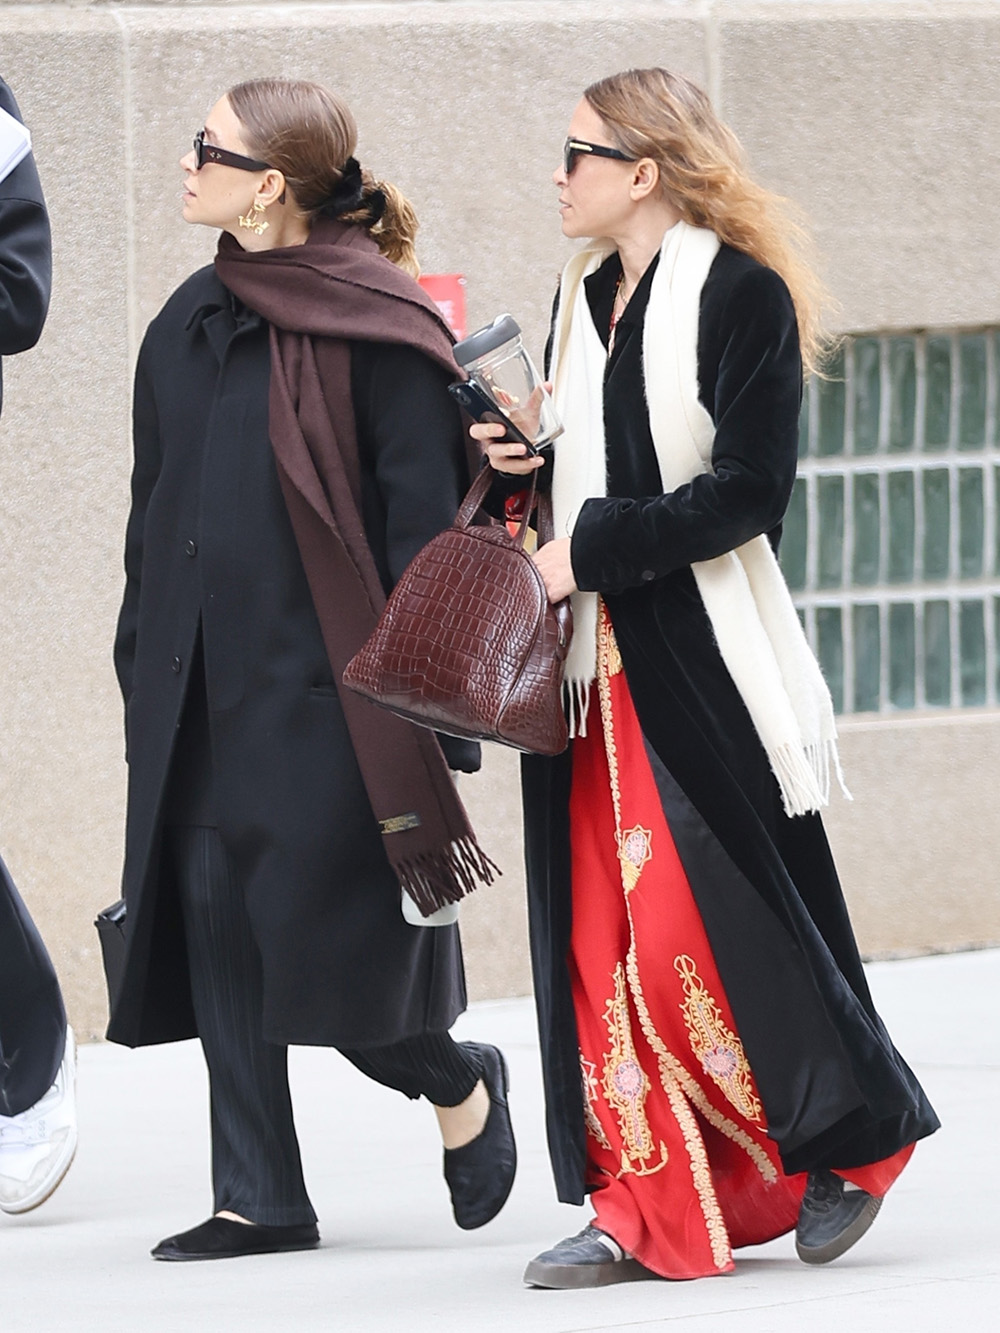 Mary-Kate Olsen makes rare appearance in colorful outfit